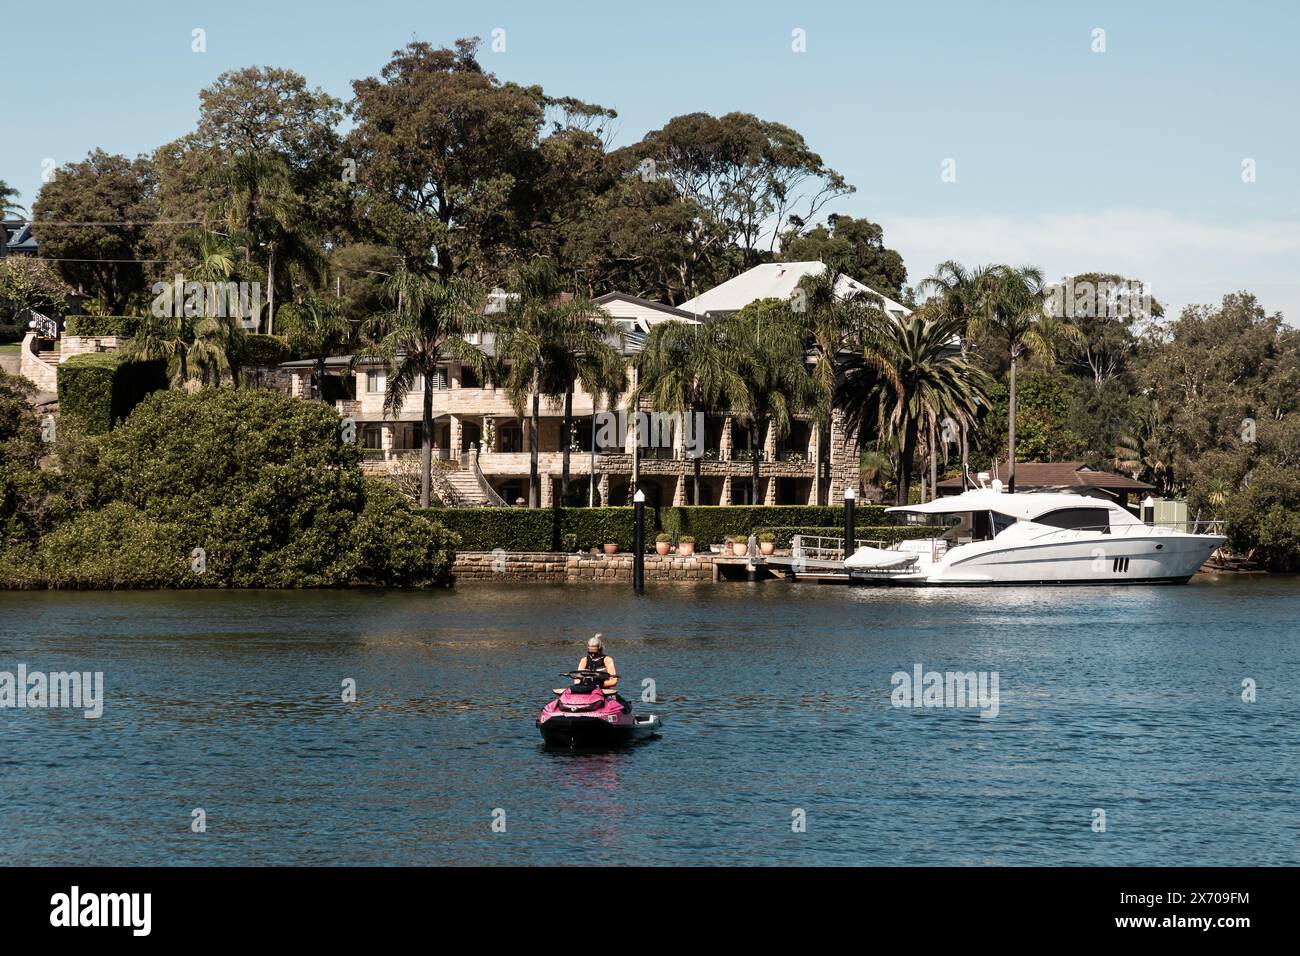 Residential properties overlooking Bayview Dog Park, Rowland Reserve, Bayview, Sydney. Stock Photo